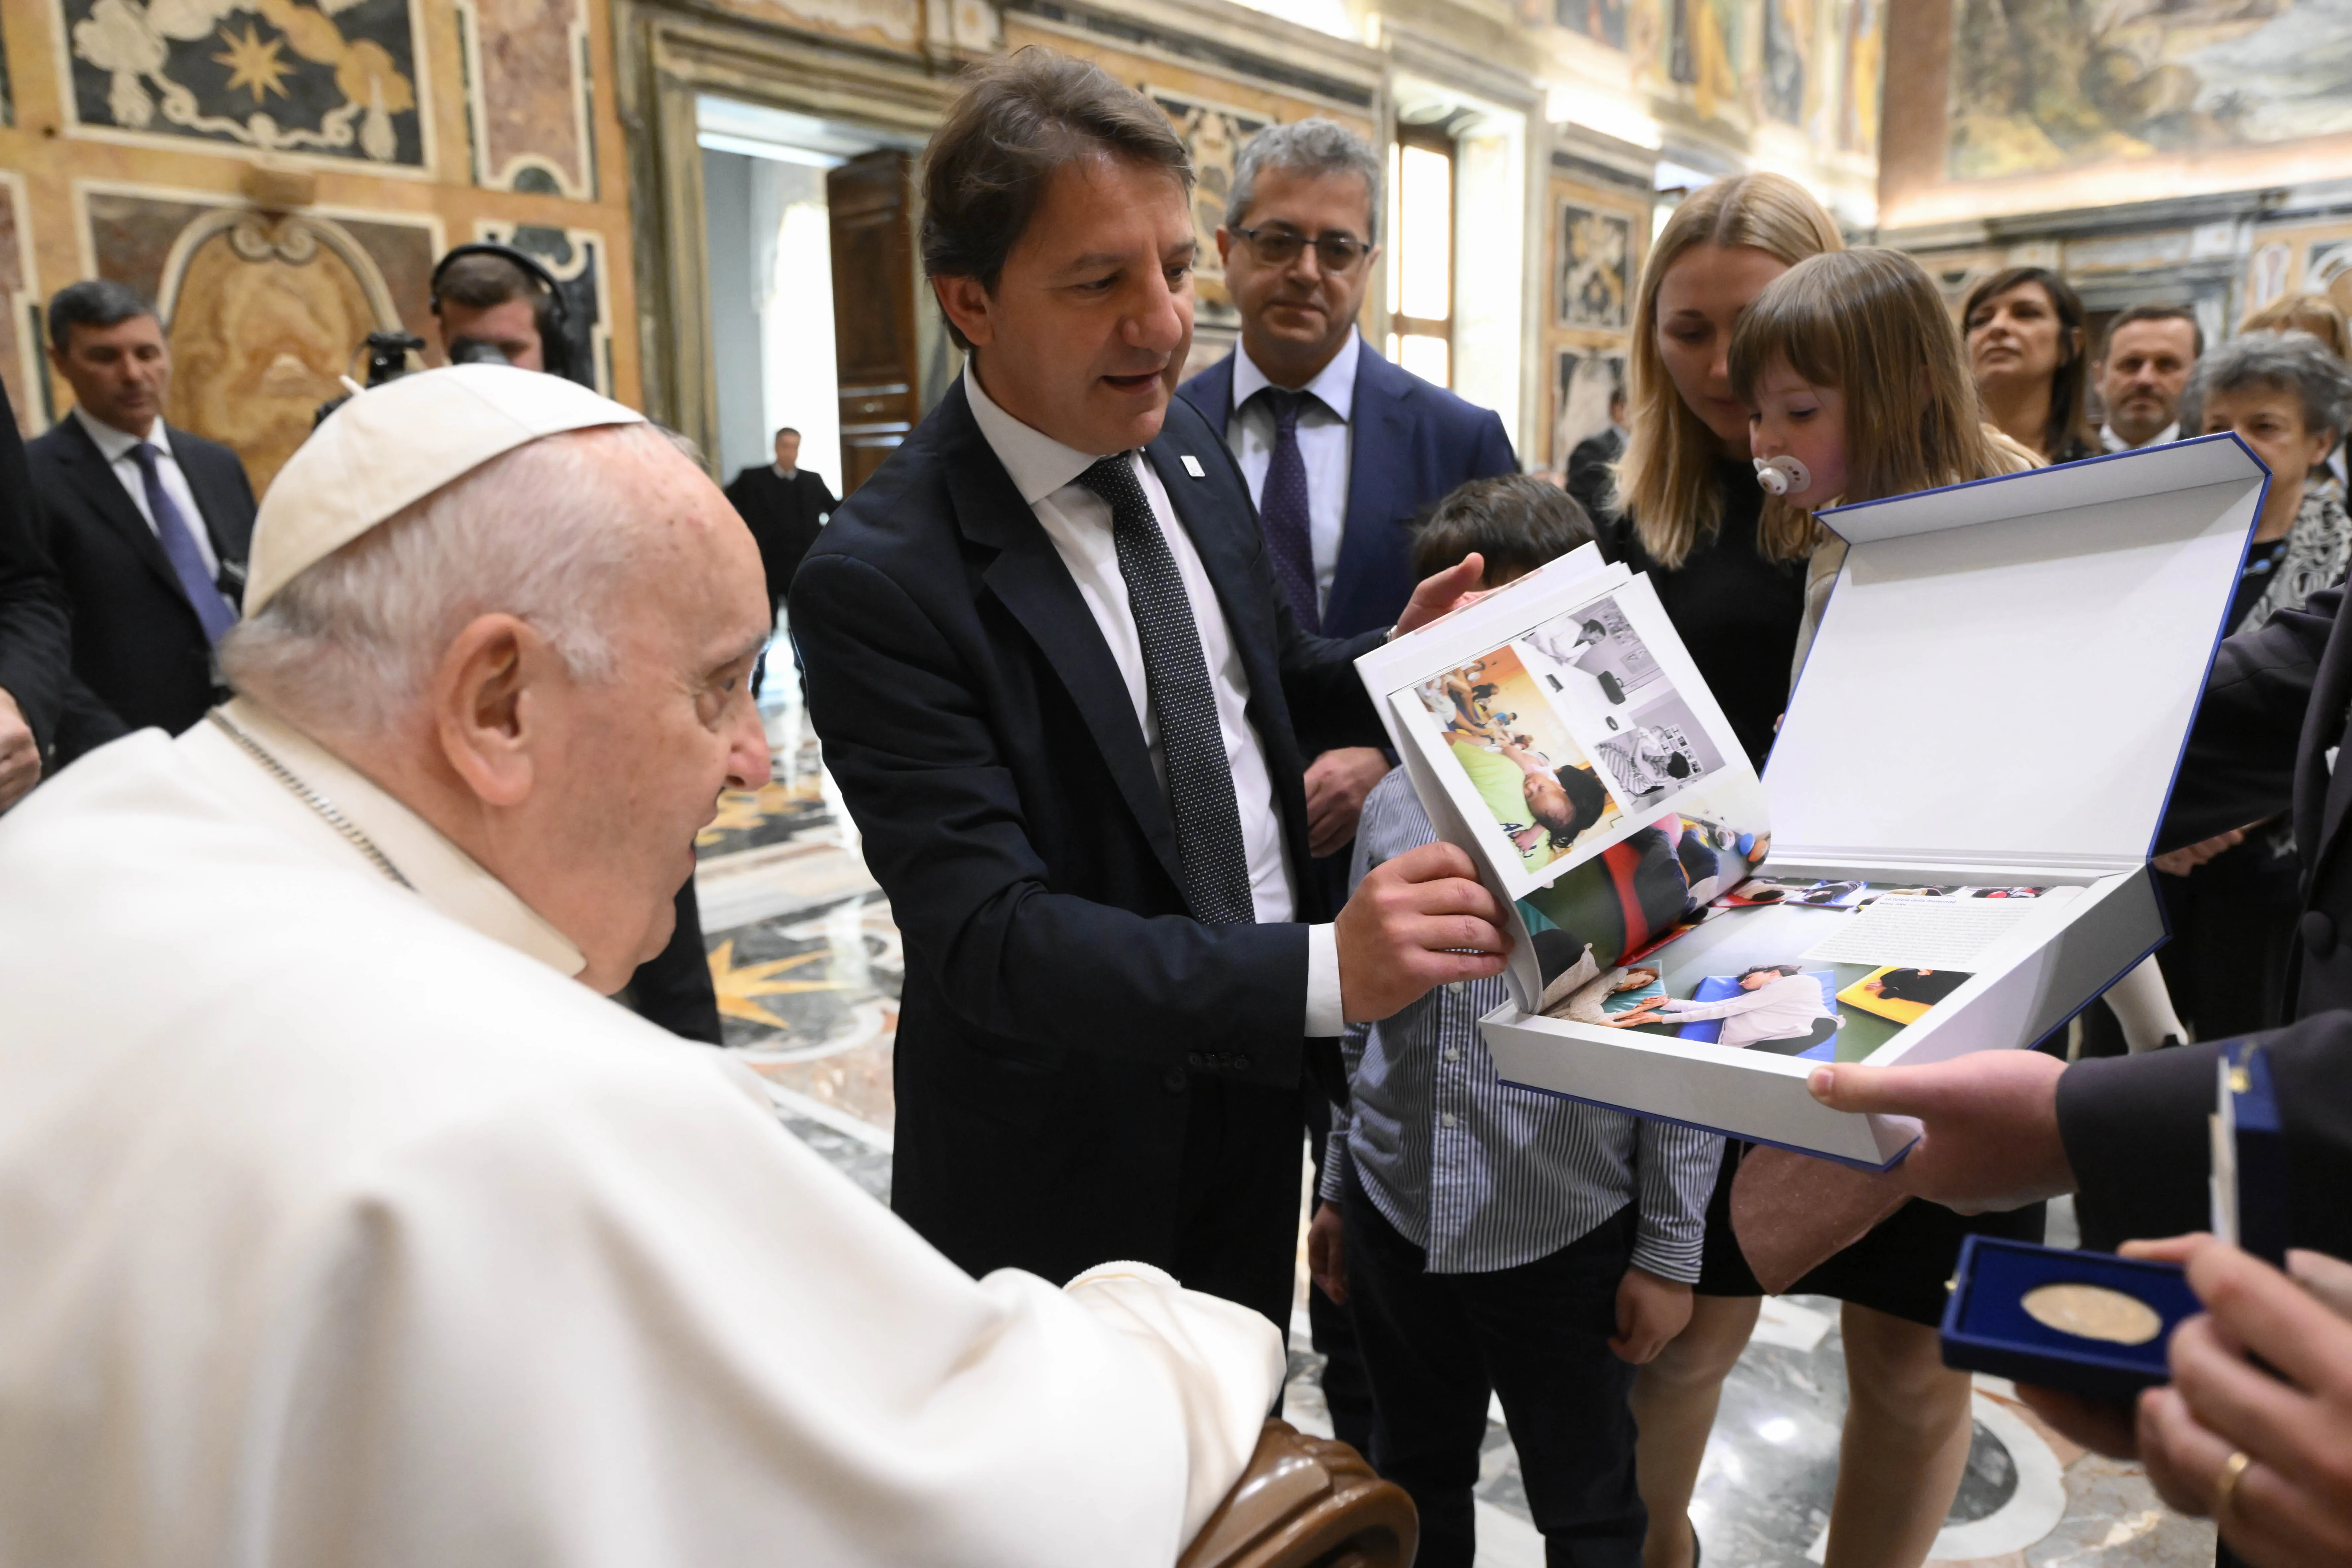 Pope Francis meets with executives and employees of the Istituto Nazionale della Previdenza Sociale, Italy's main welfare agency, April 3, 2023.?w=200&h=150